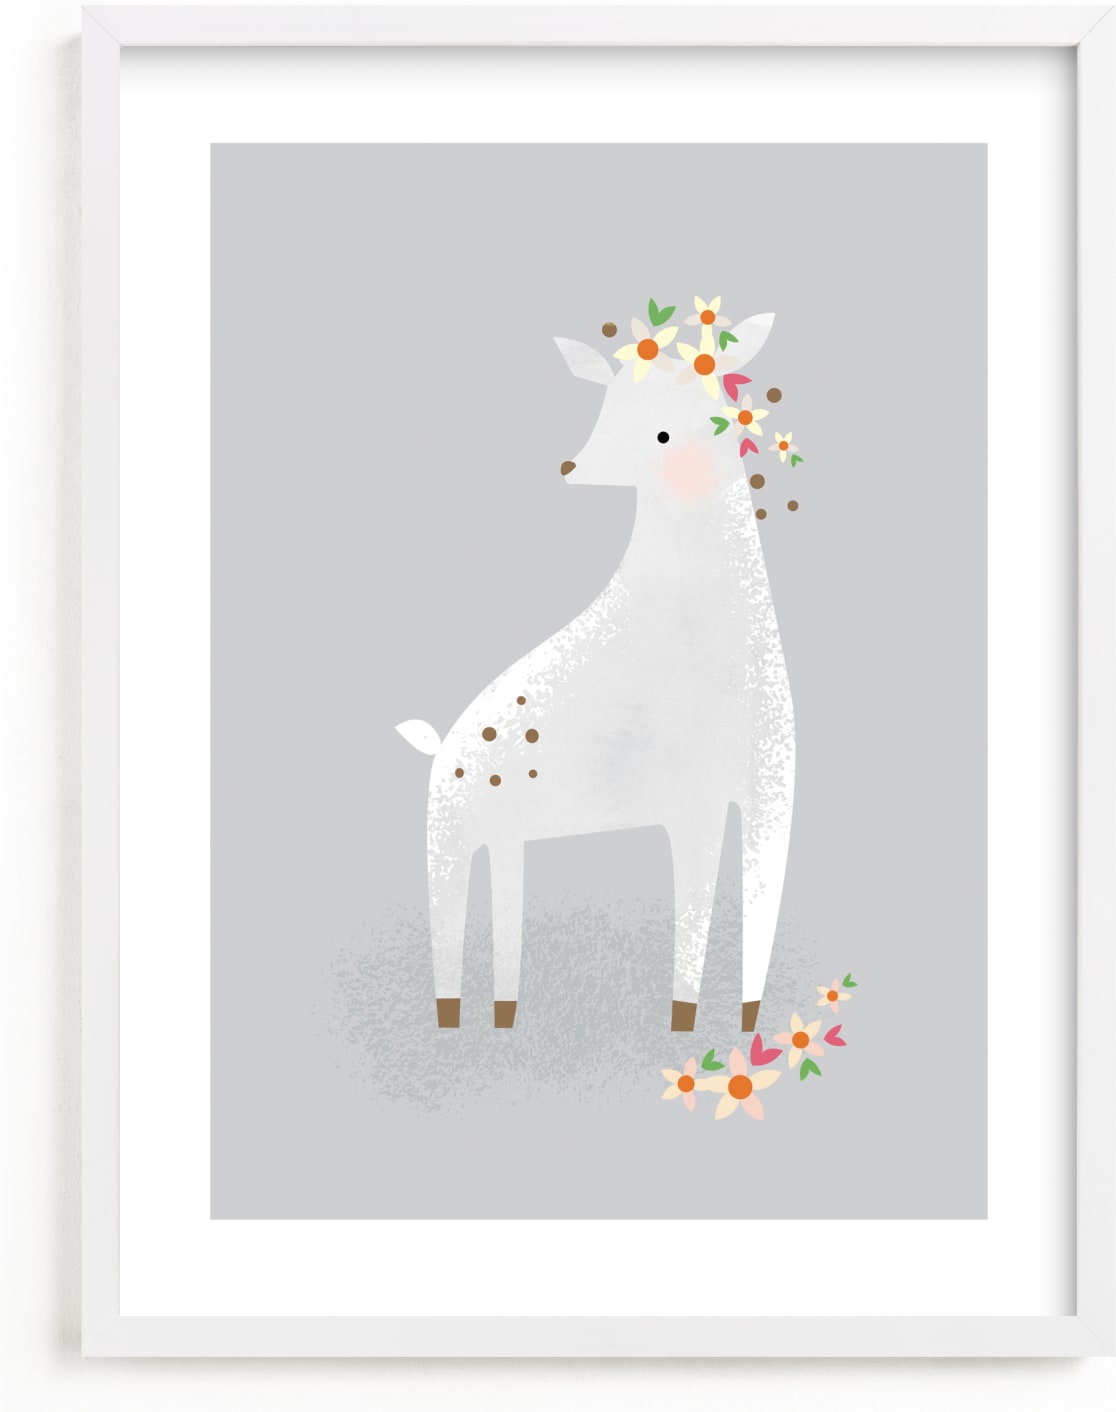 This is a grey kids wall art by Lori Wemple called Little Deer.